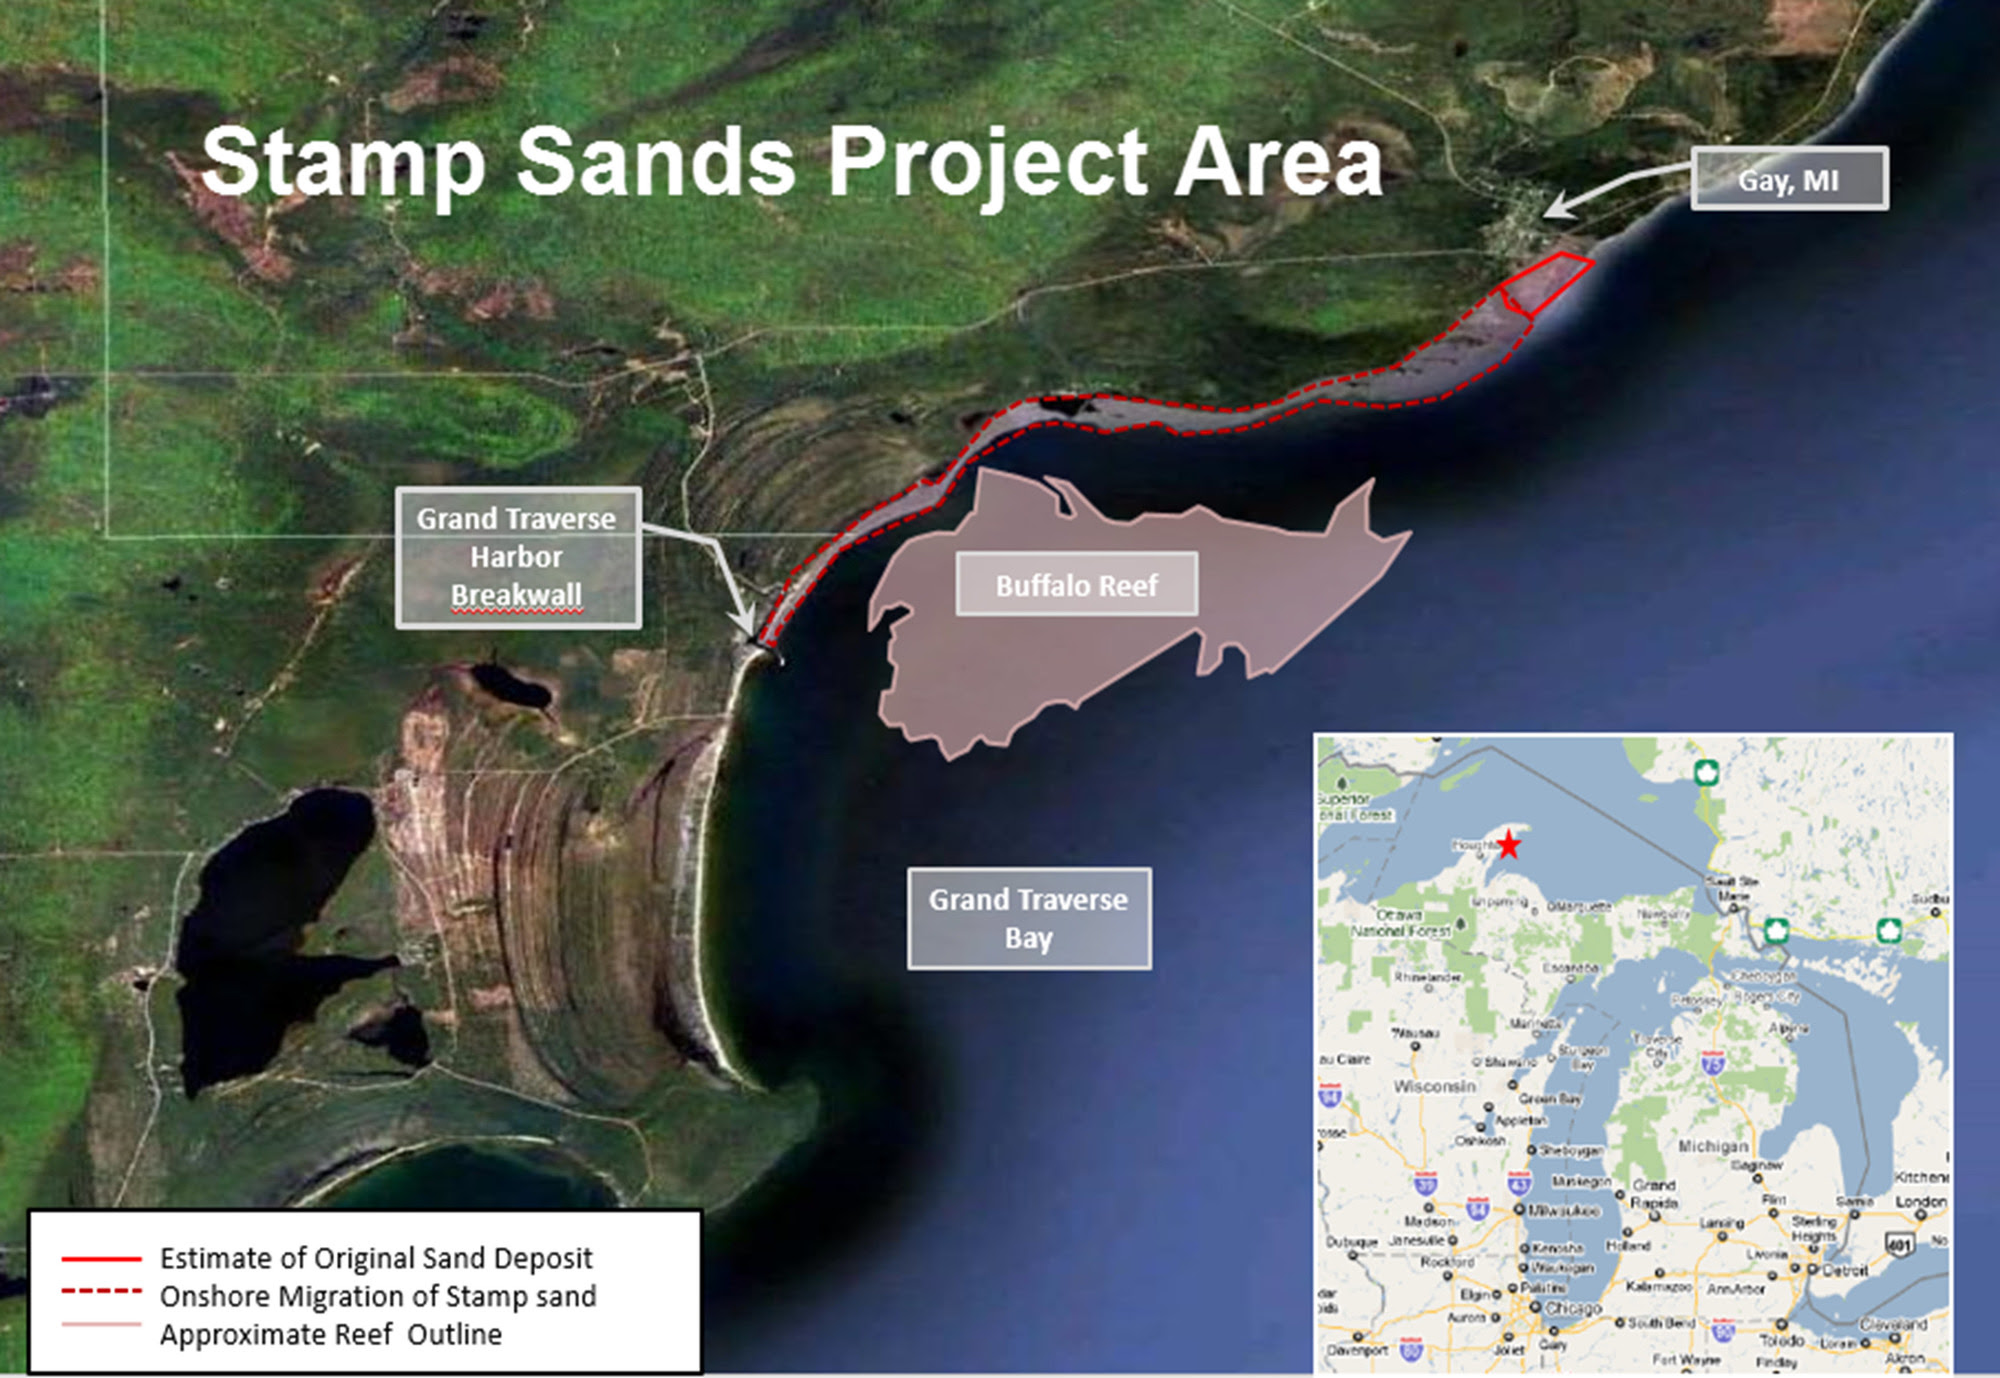 A map shows the stamp sands project area and Buffalo Reef.